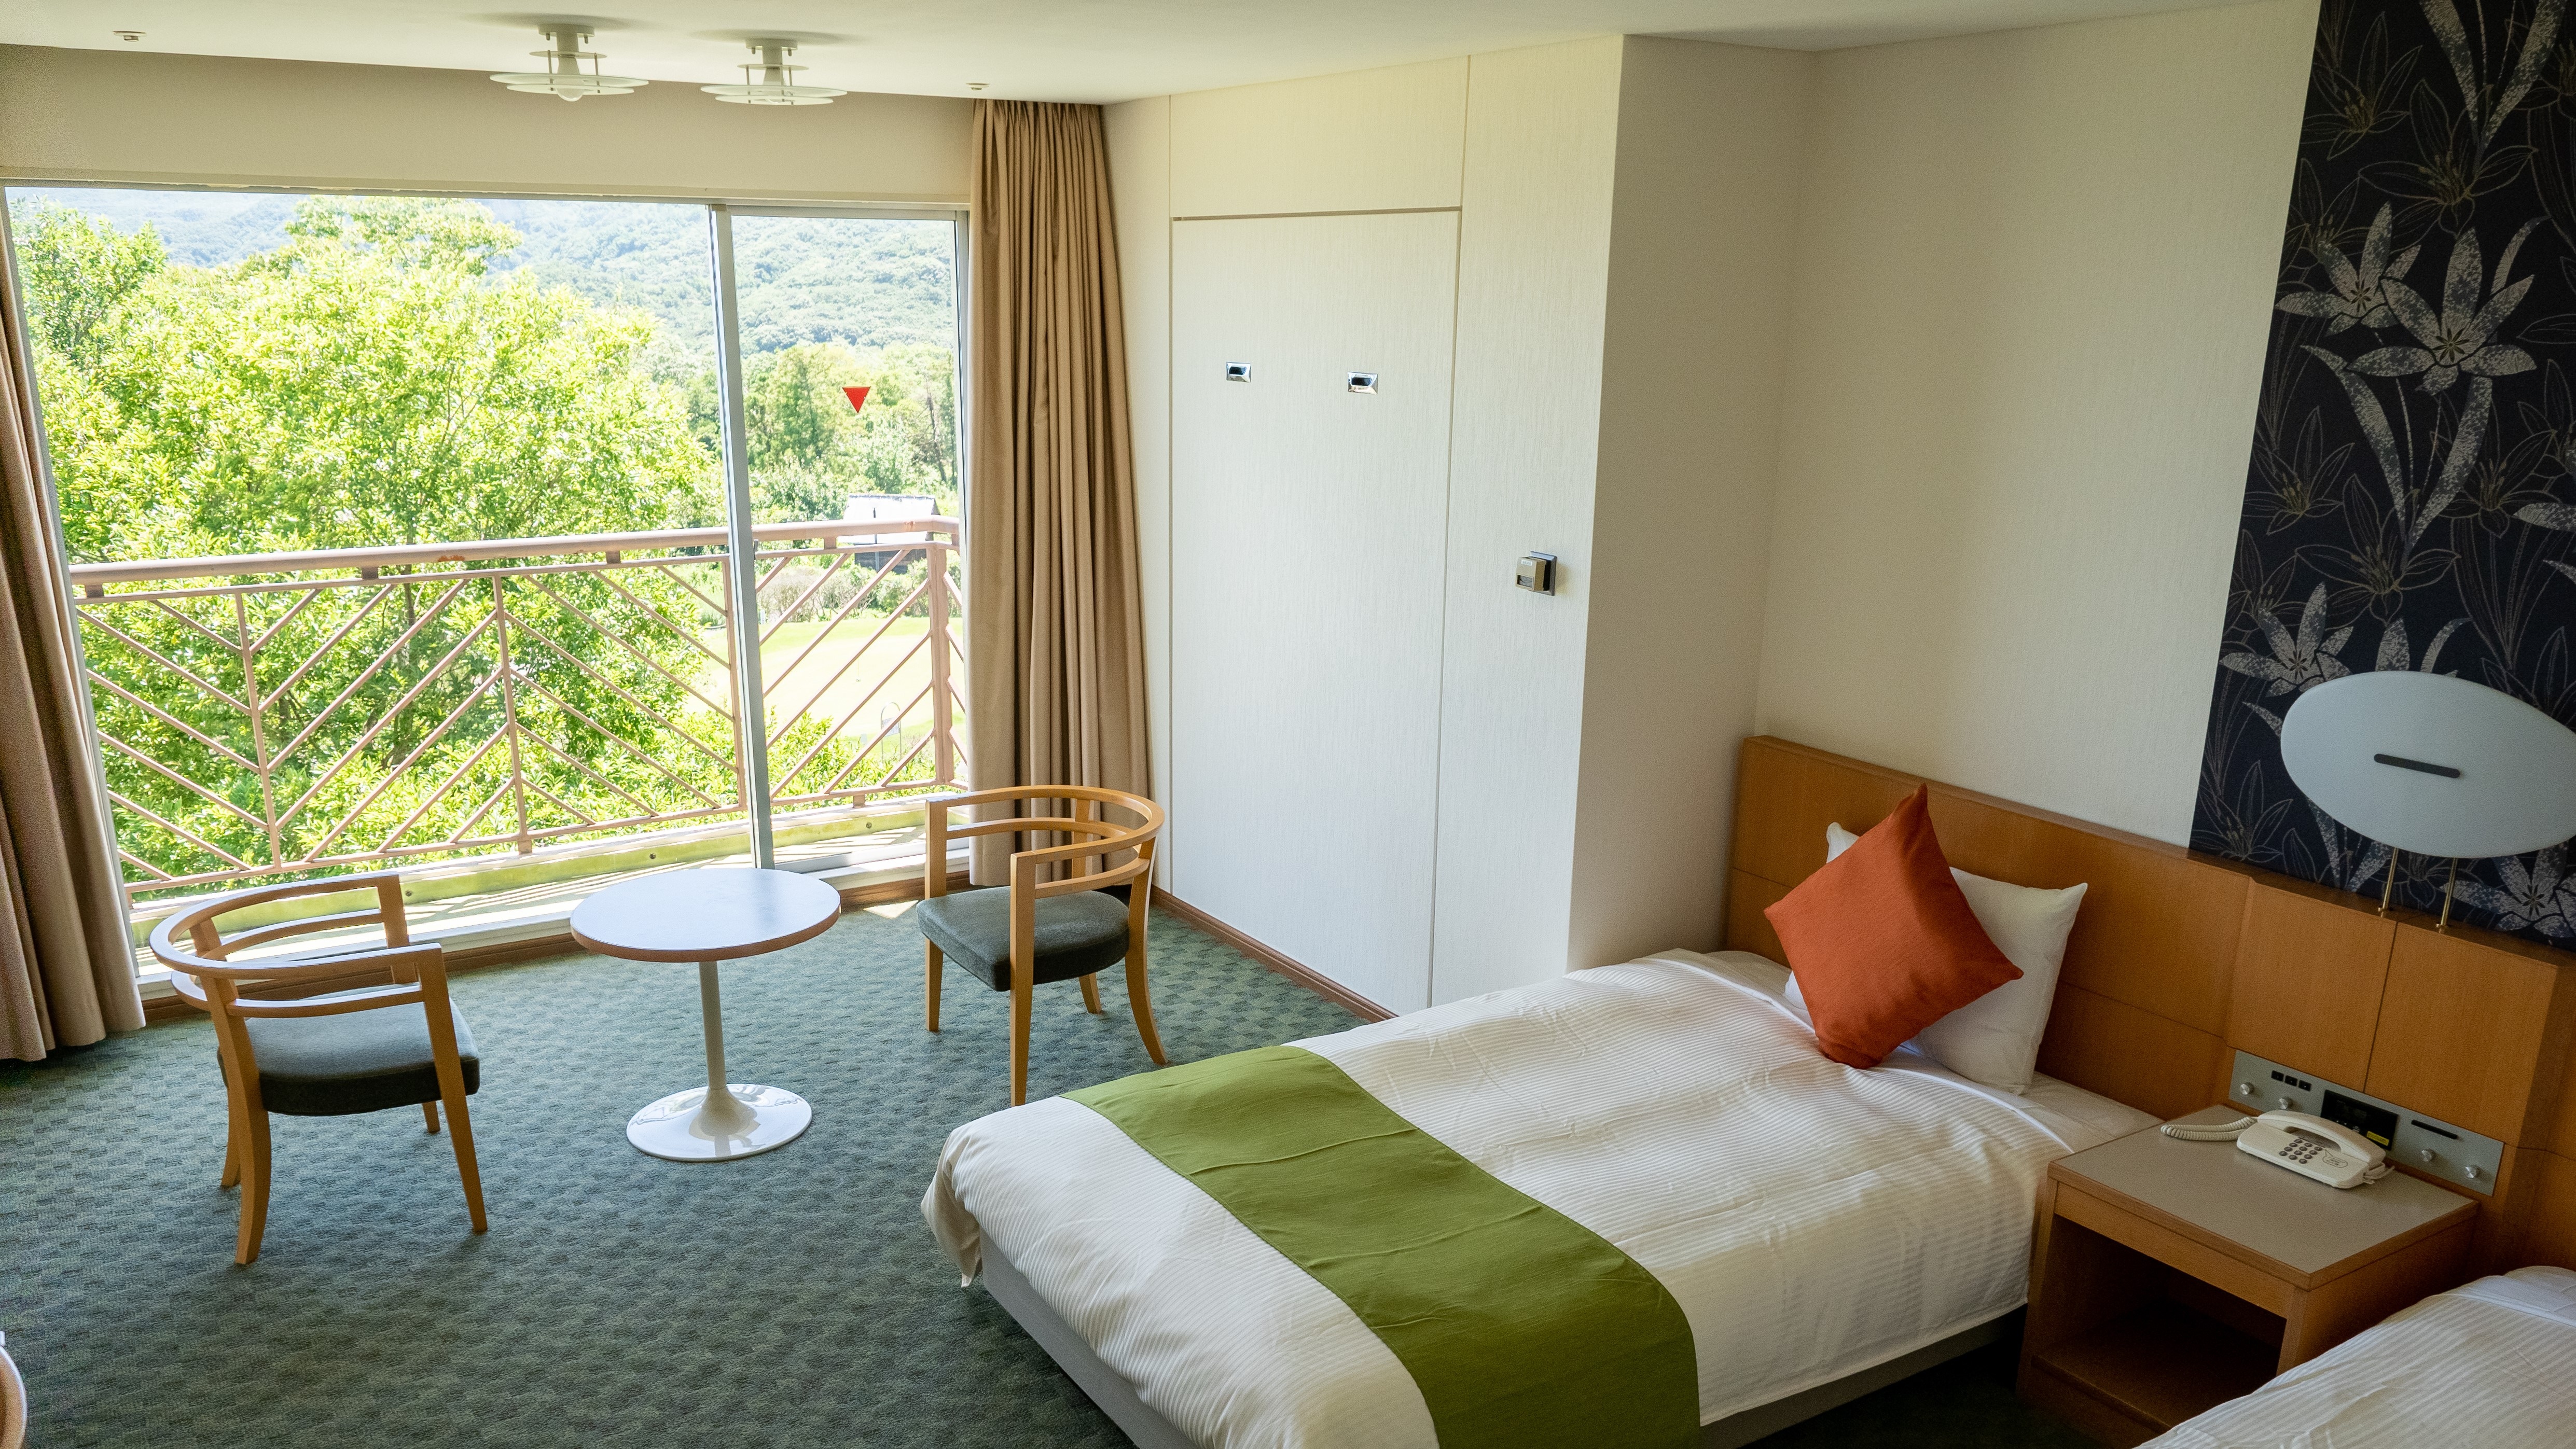 Western-style room facing the sunrise ◆ Non-smoking ◆ 36㎡ ◆ Capacity 3 people